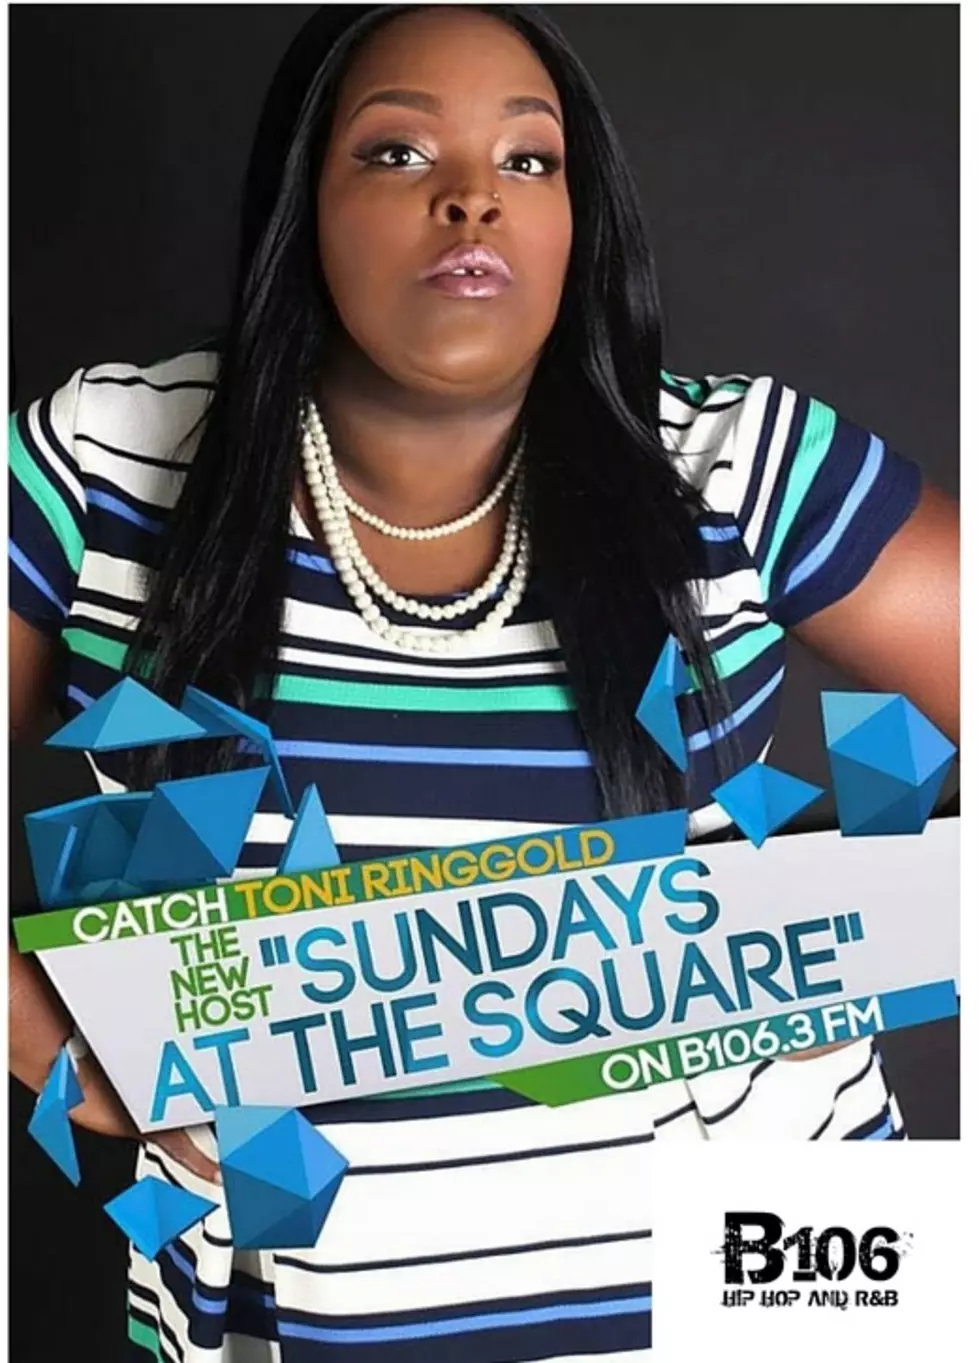 Sunday's At the Square hosted by Toni Ringgold